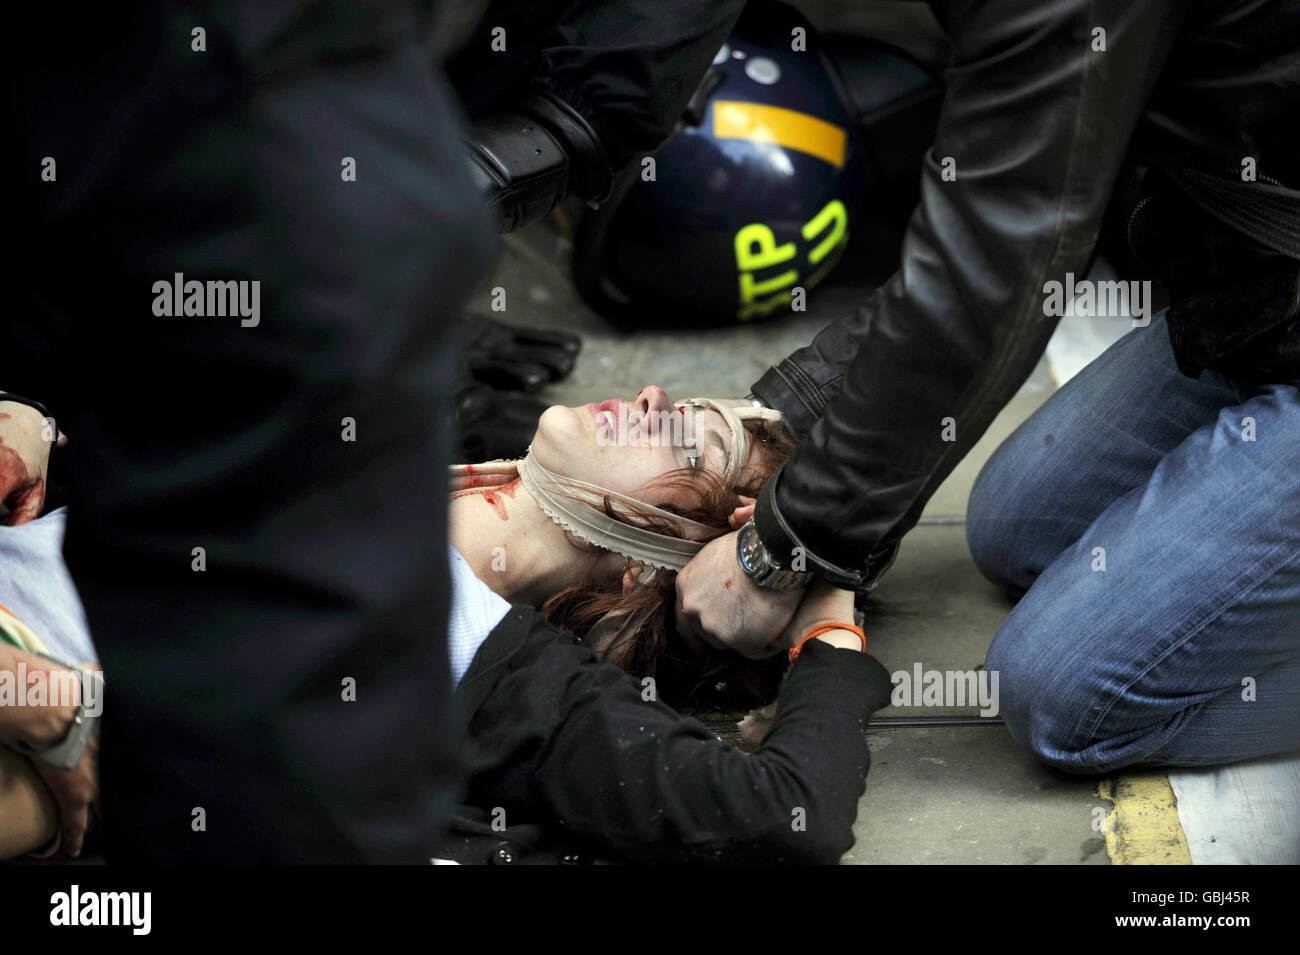 A woman lays seriously injured and is attended by police and medics near Queen Victoria Street in the centre of London during the G20 protests. Stock Photo